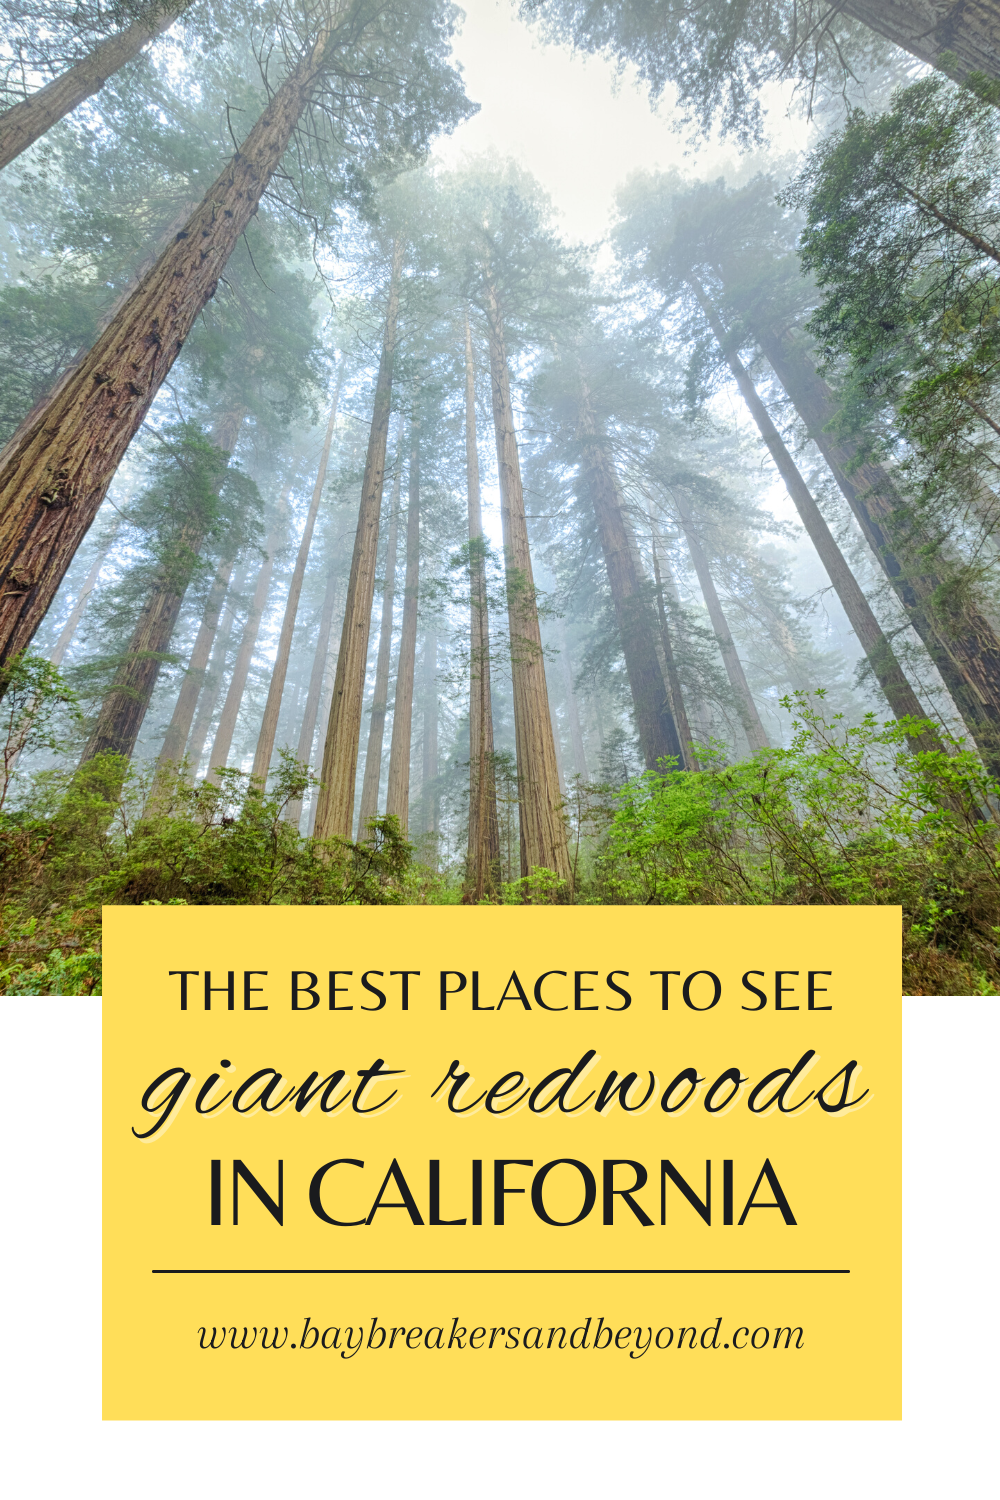 The best places to see giant redwoods in california